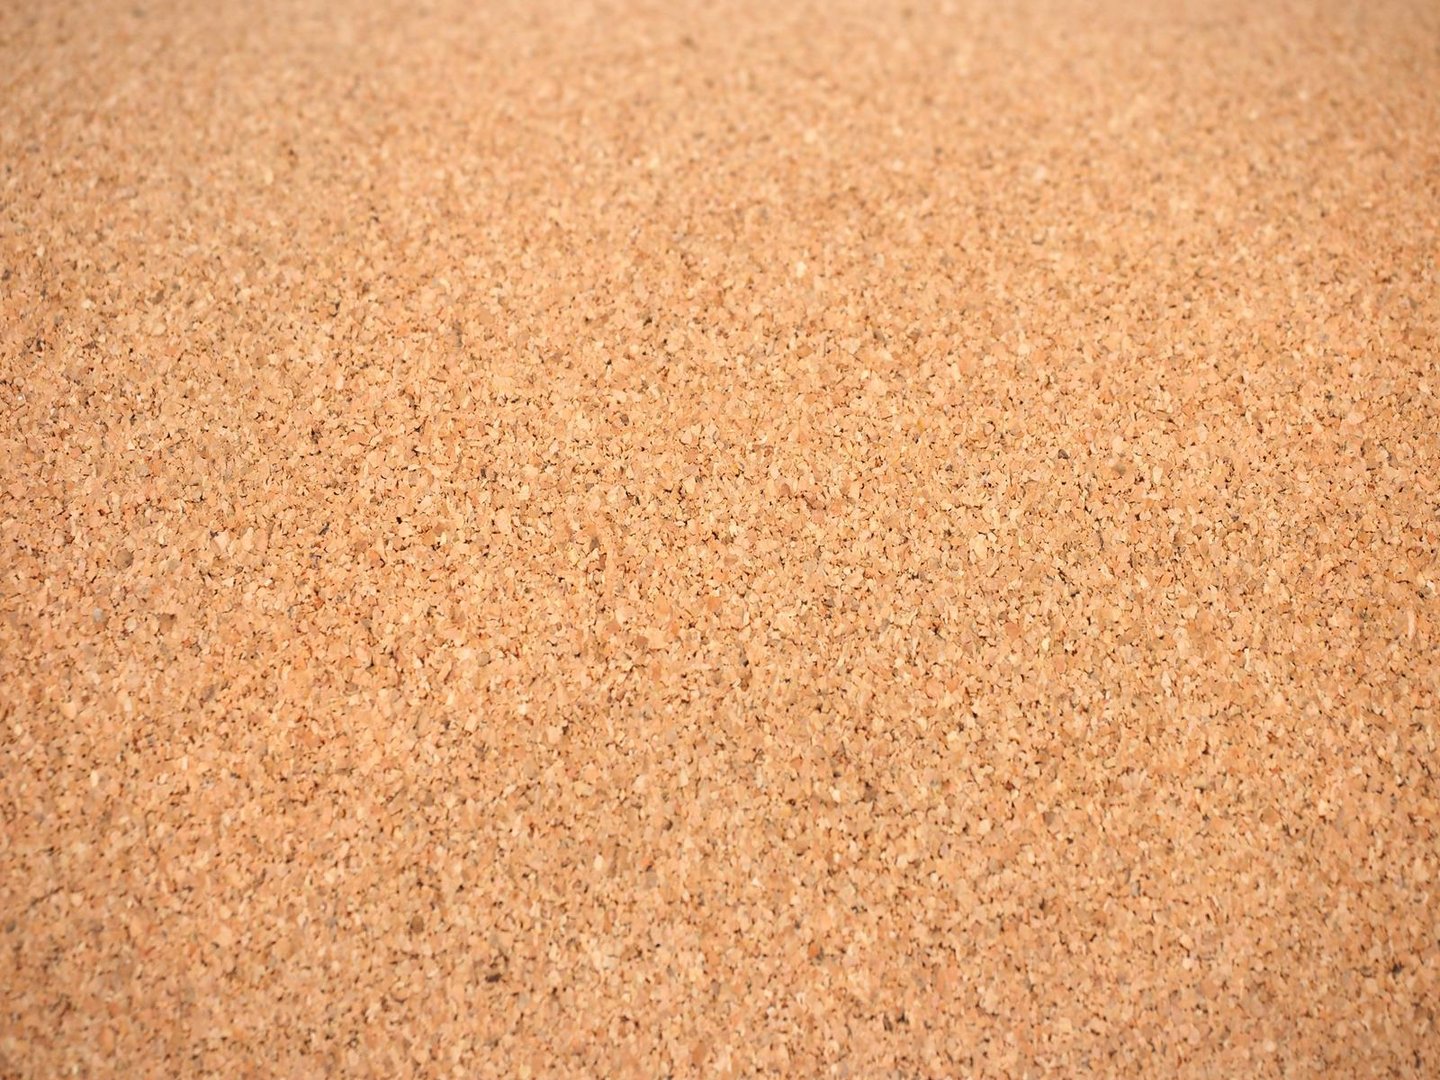 R K 06 Roll cork 6 mm thick Remaining stock 1